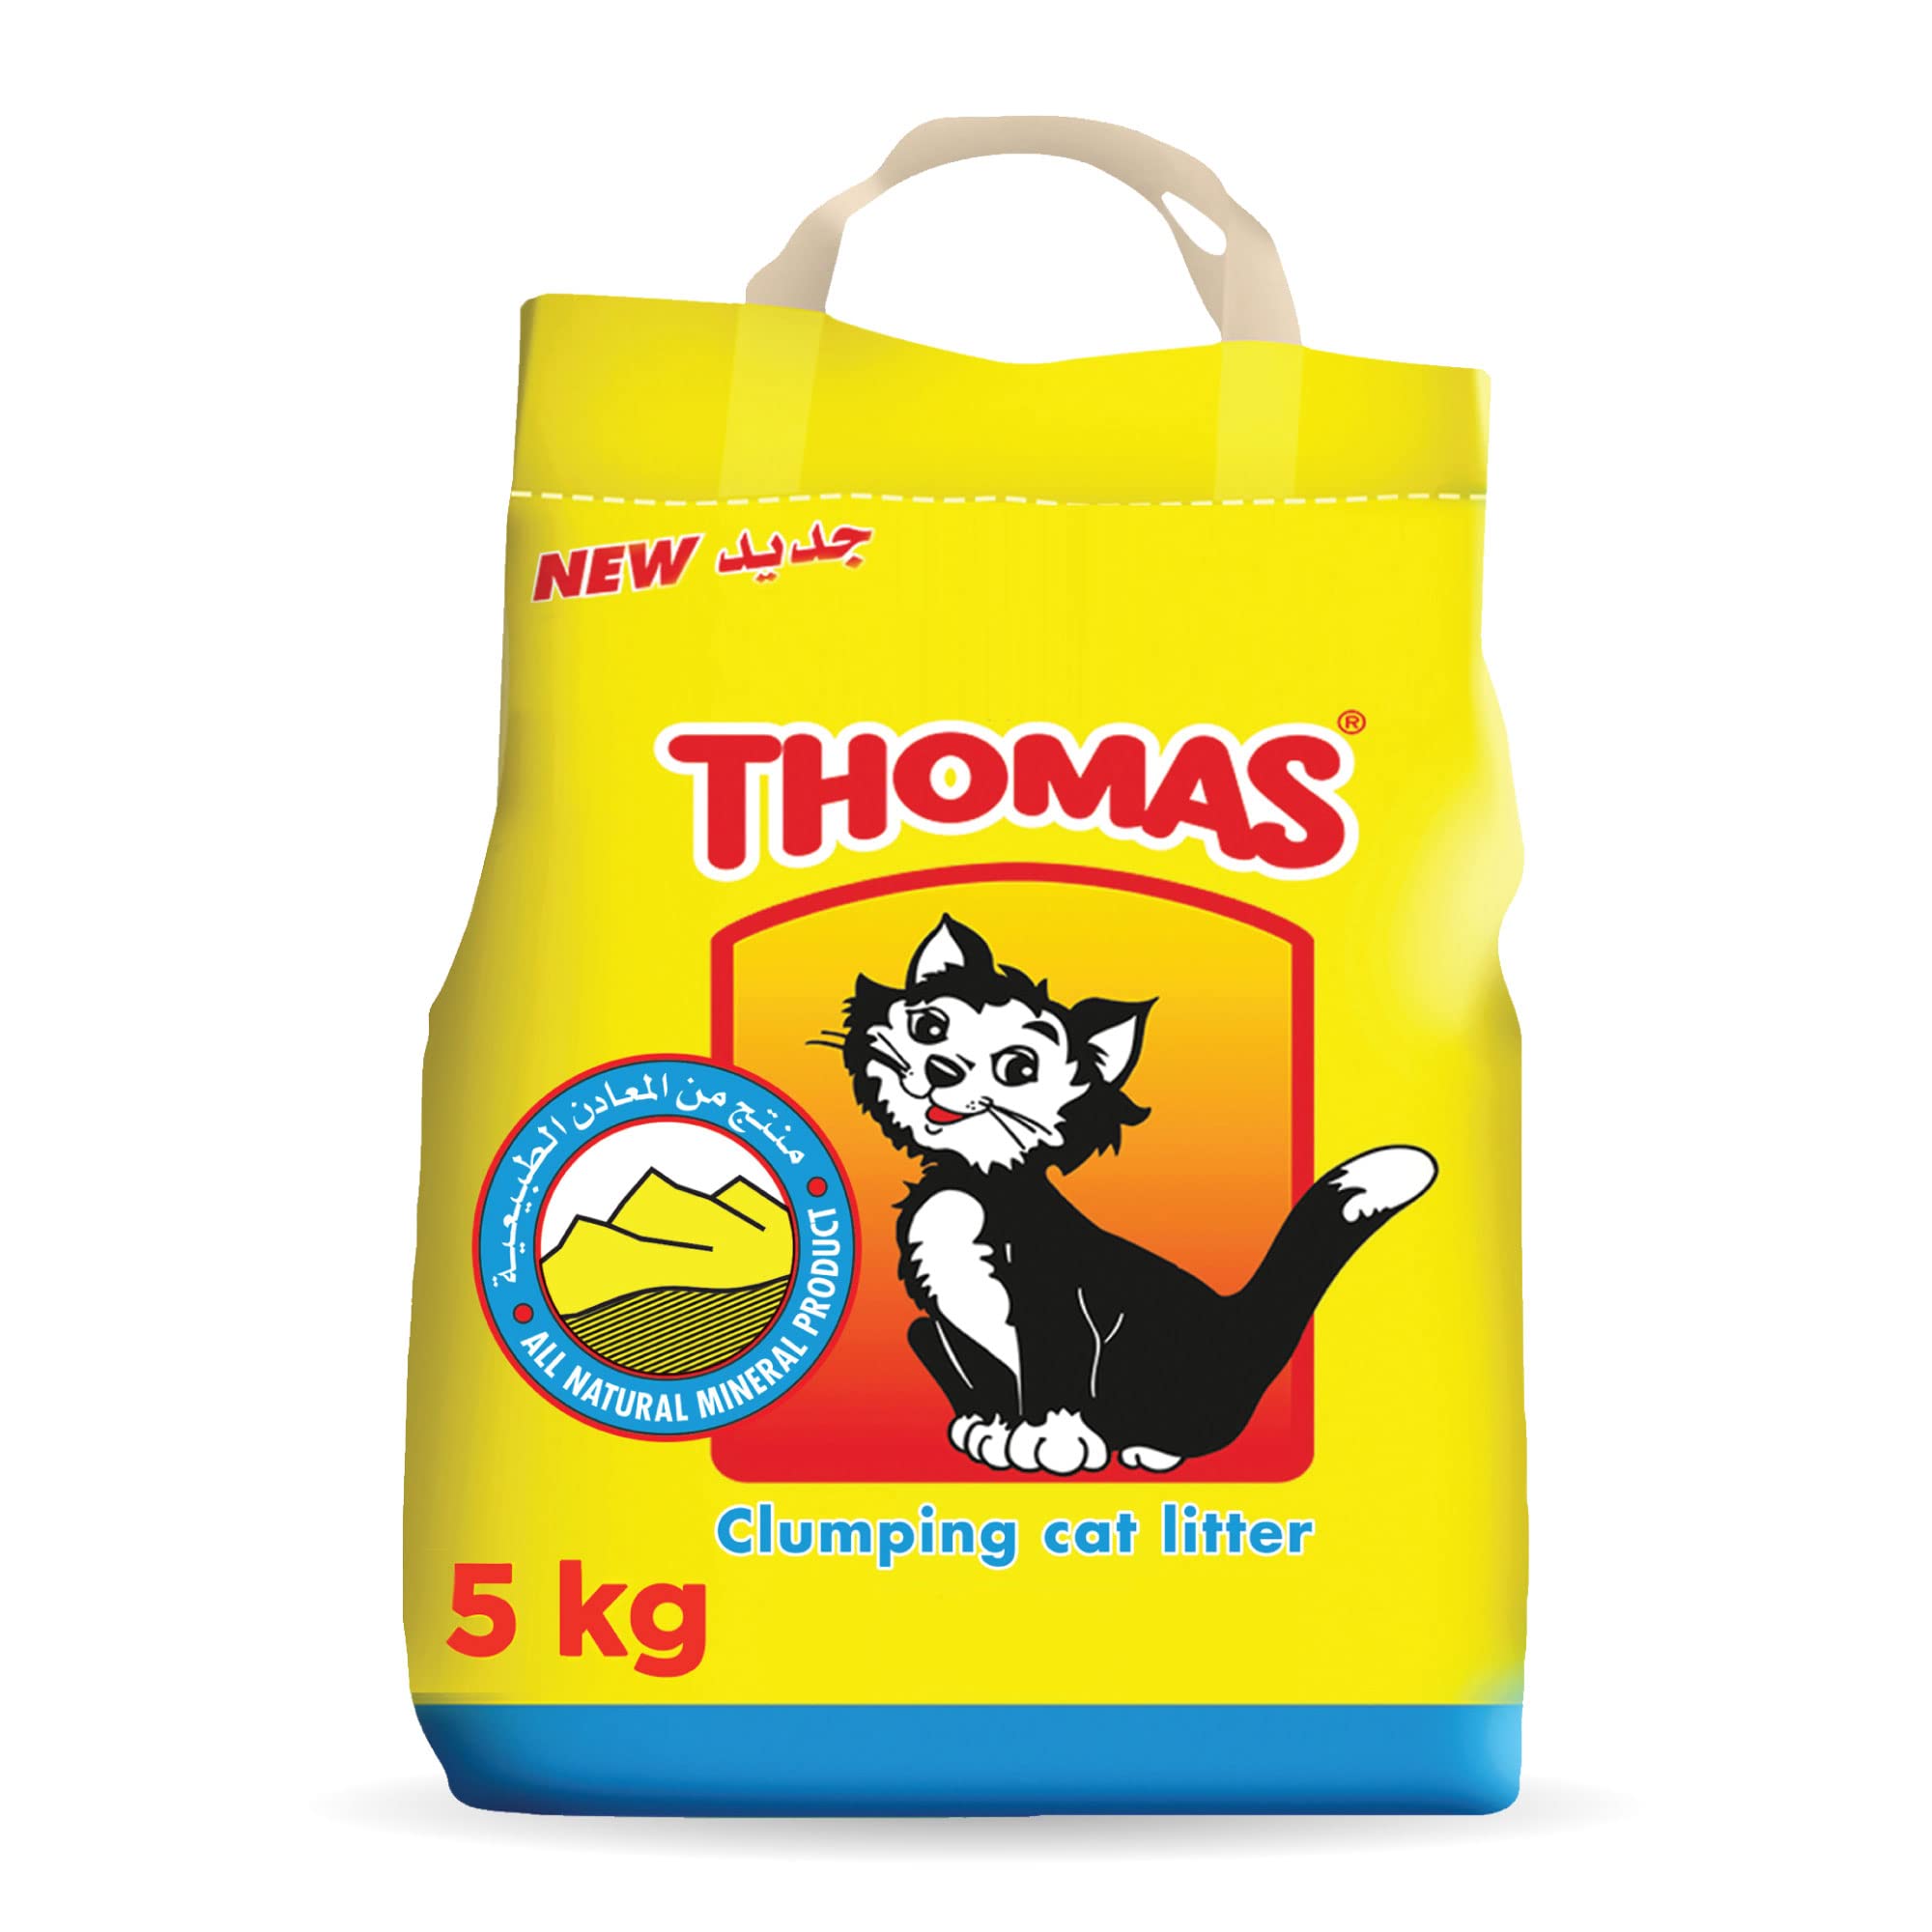 Thomas Cat Litter, Natural Minerals Litter Sand, it's Clumping and Highly Absorbent Nature Ensures Your Cat to Come Back to its Cat Litter Box with Comfort, Bag of 5kg